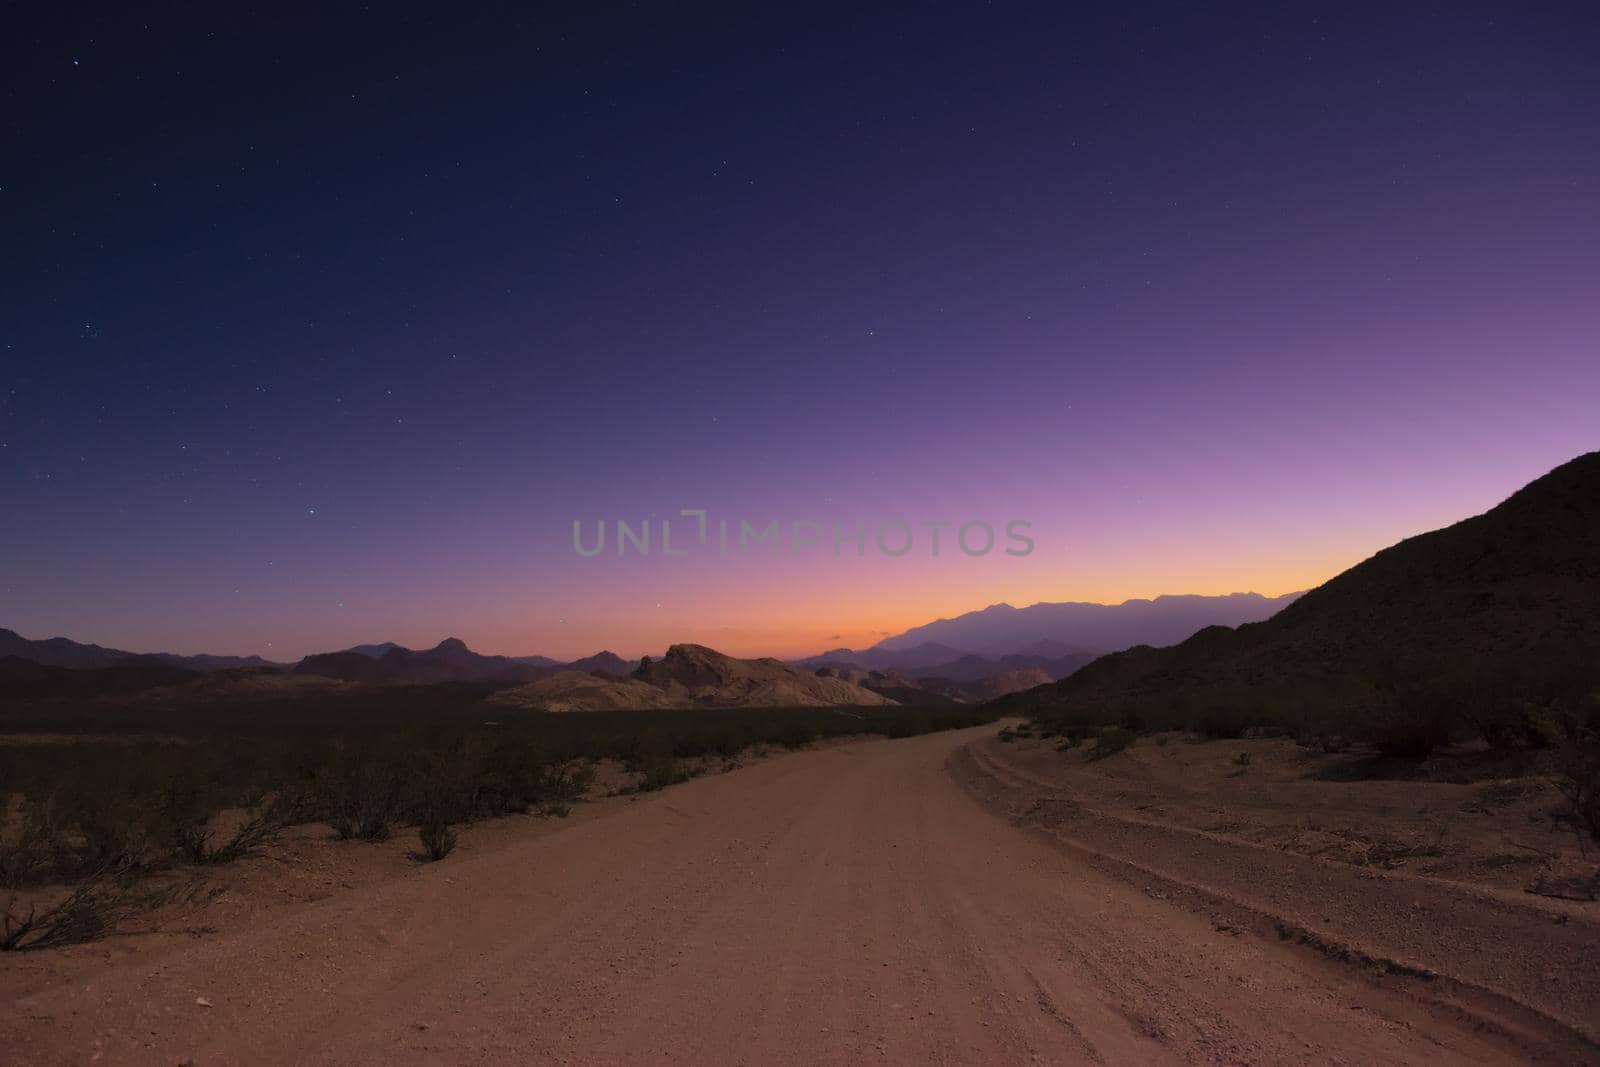 Dirt road into the unknown under a starry twilight sky.